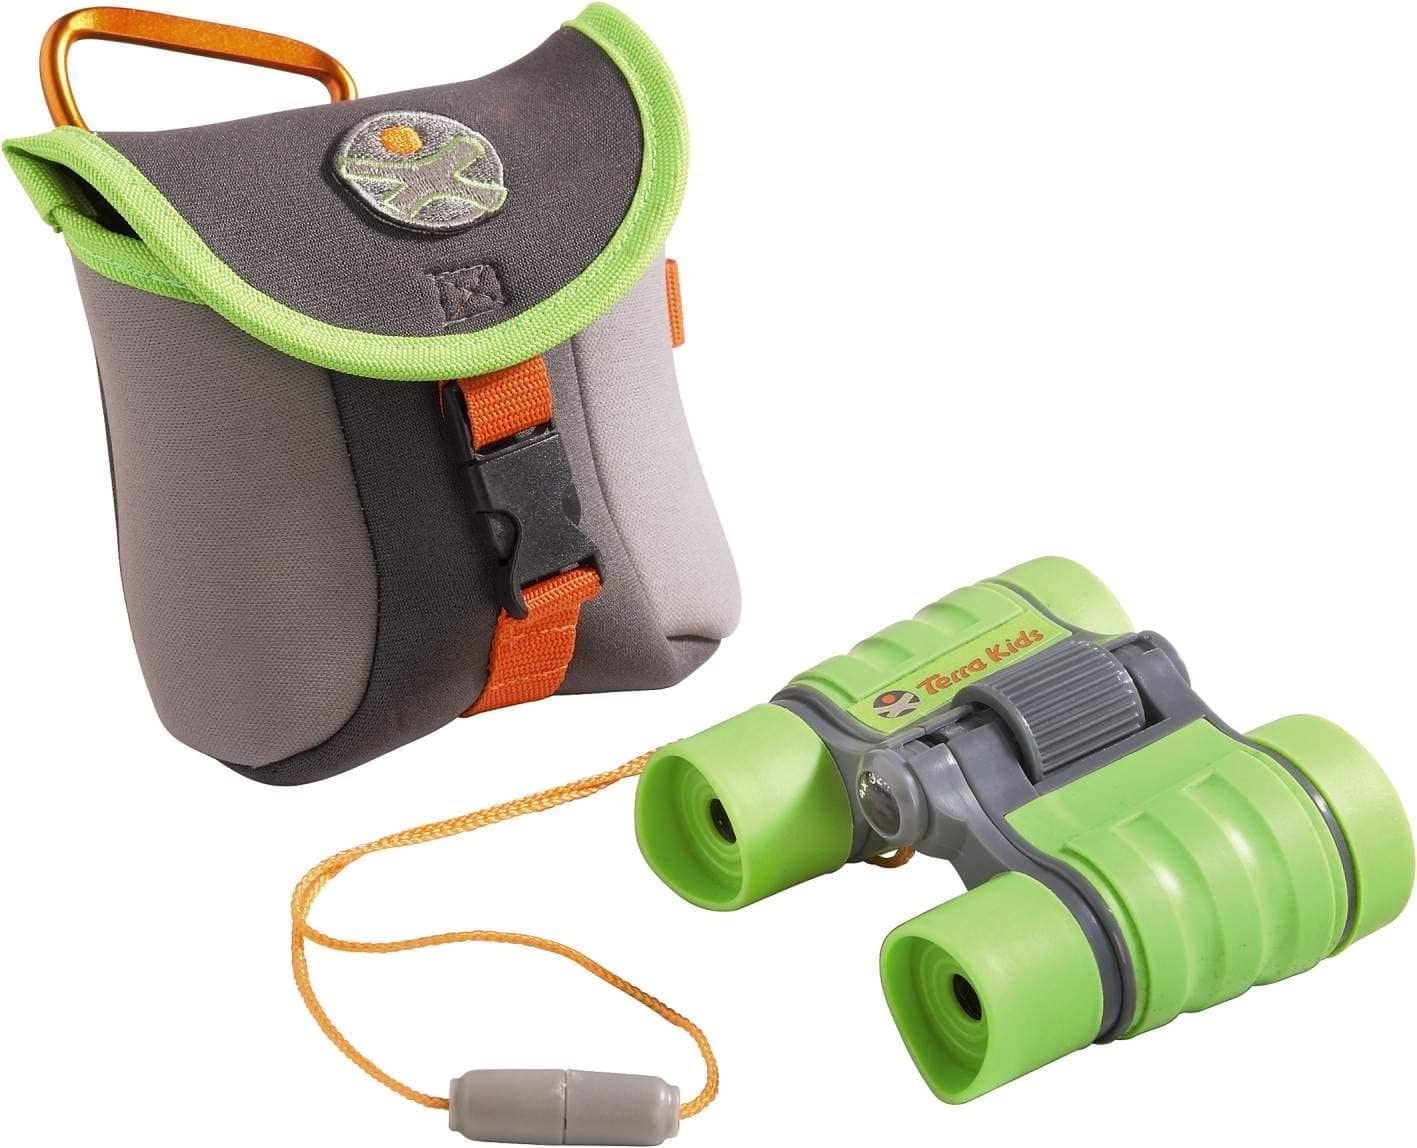 Terra Kids Binoculars - Appropriate For Children & Scouts - Hiking, Camping, Fishing, Ball Games - 4X30 Magnification With Compact Case-Kidding Around NYC